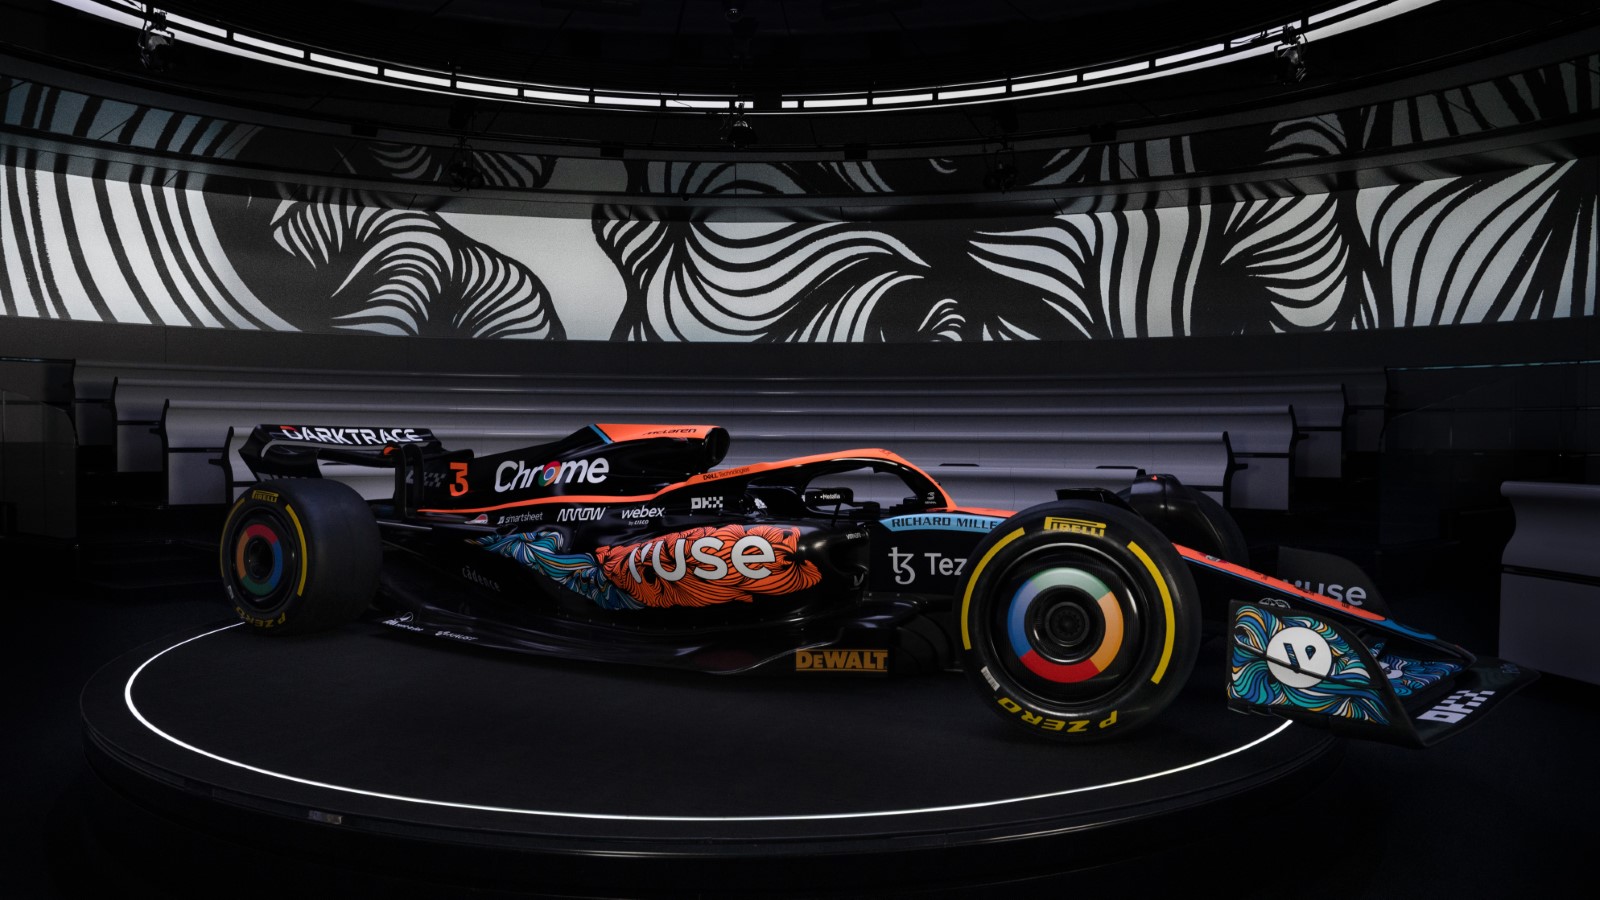 McLaren Presents One Off Livery For F1 Abu Dhabi GP